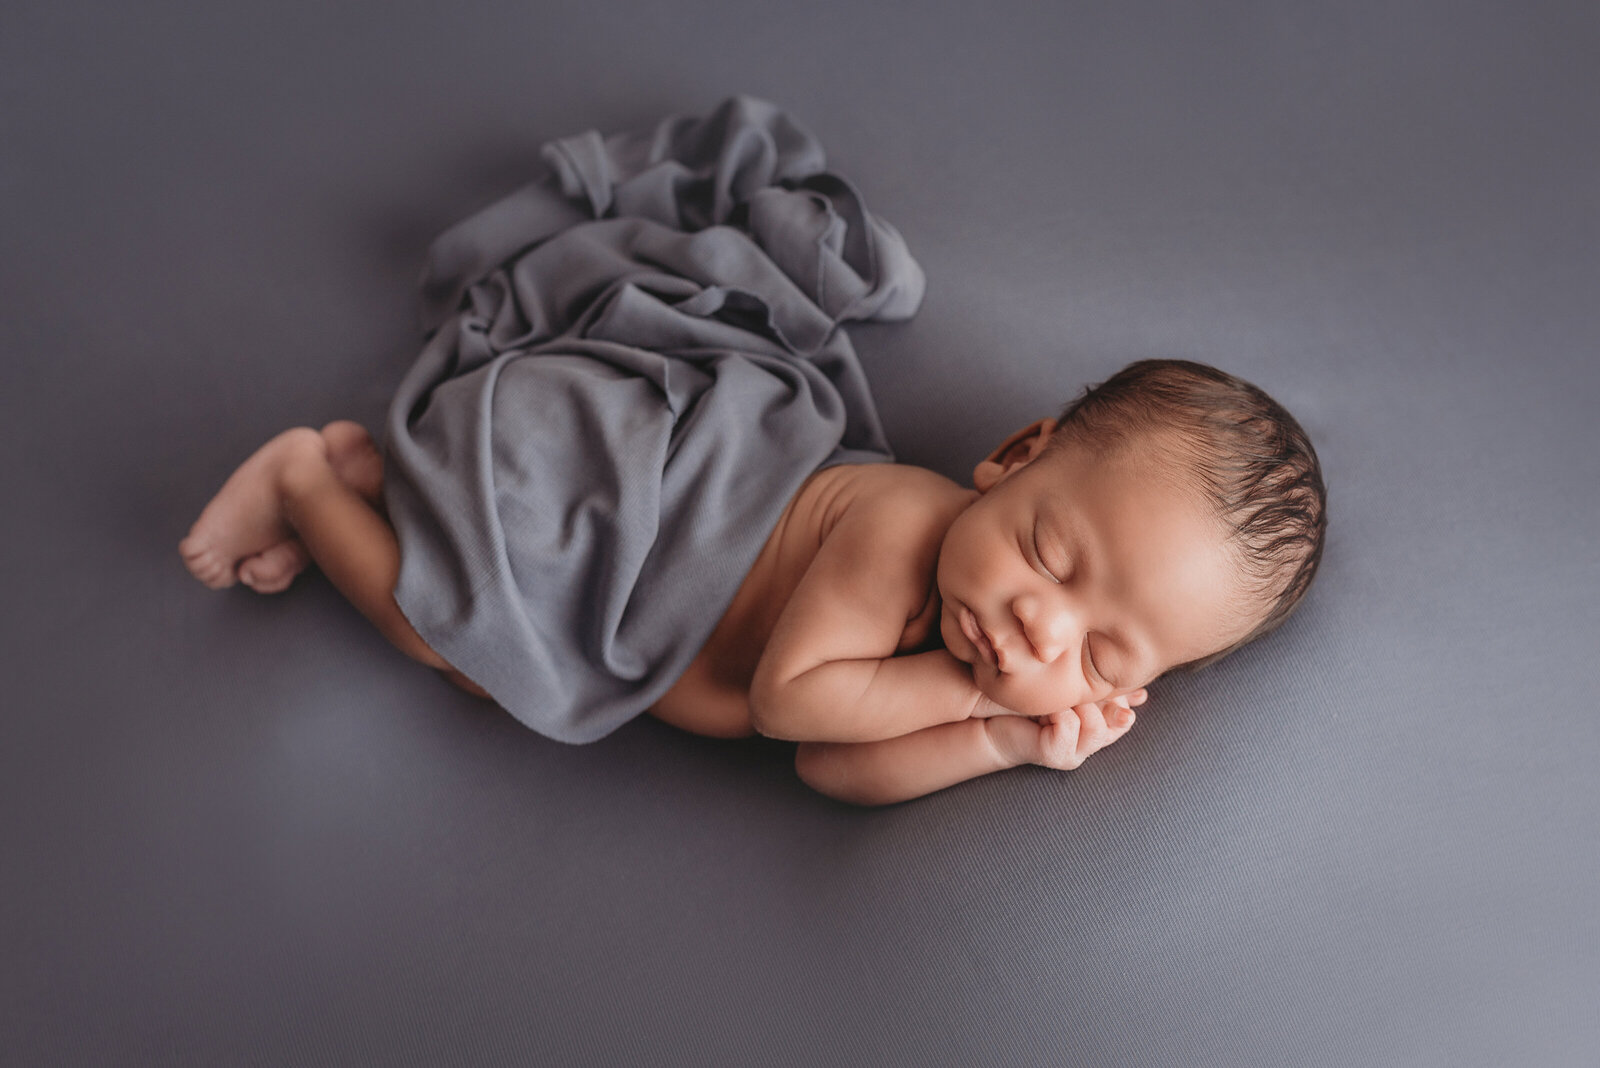 Newborn baby boy asleep posed laying on side with hands together under cheek and feet together laying on blue fabric backdrop with blue fabric draped over diaper